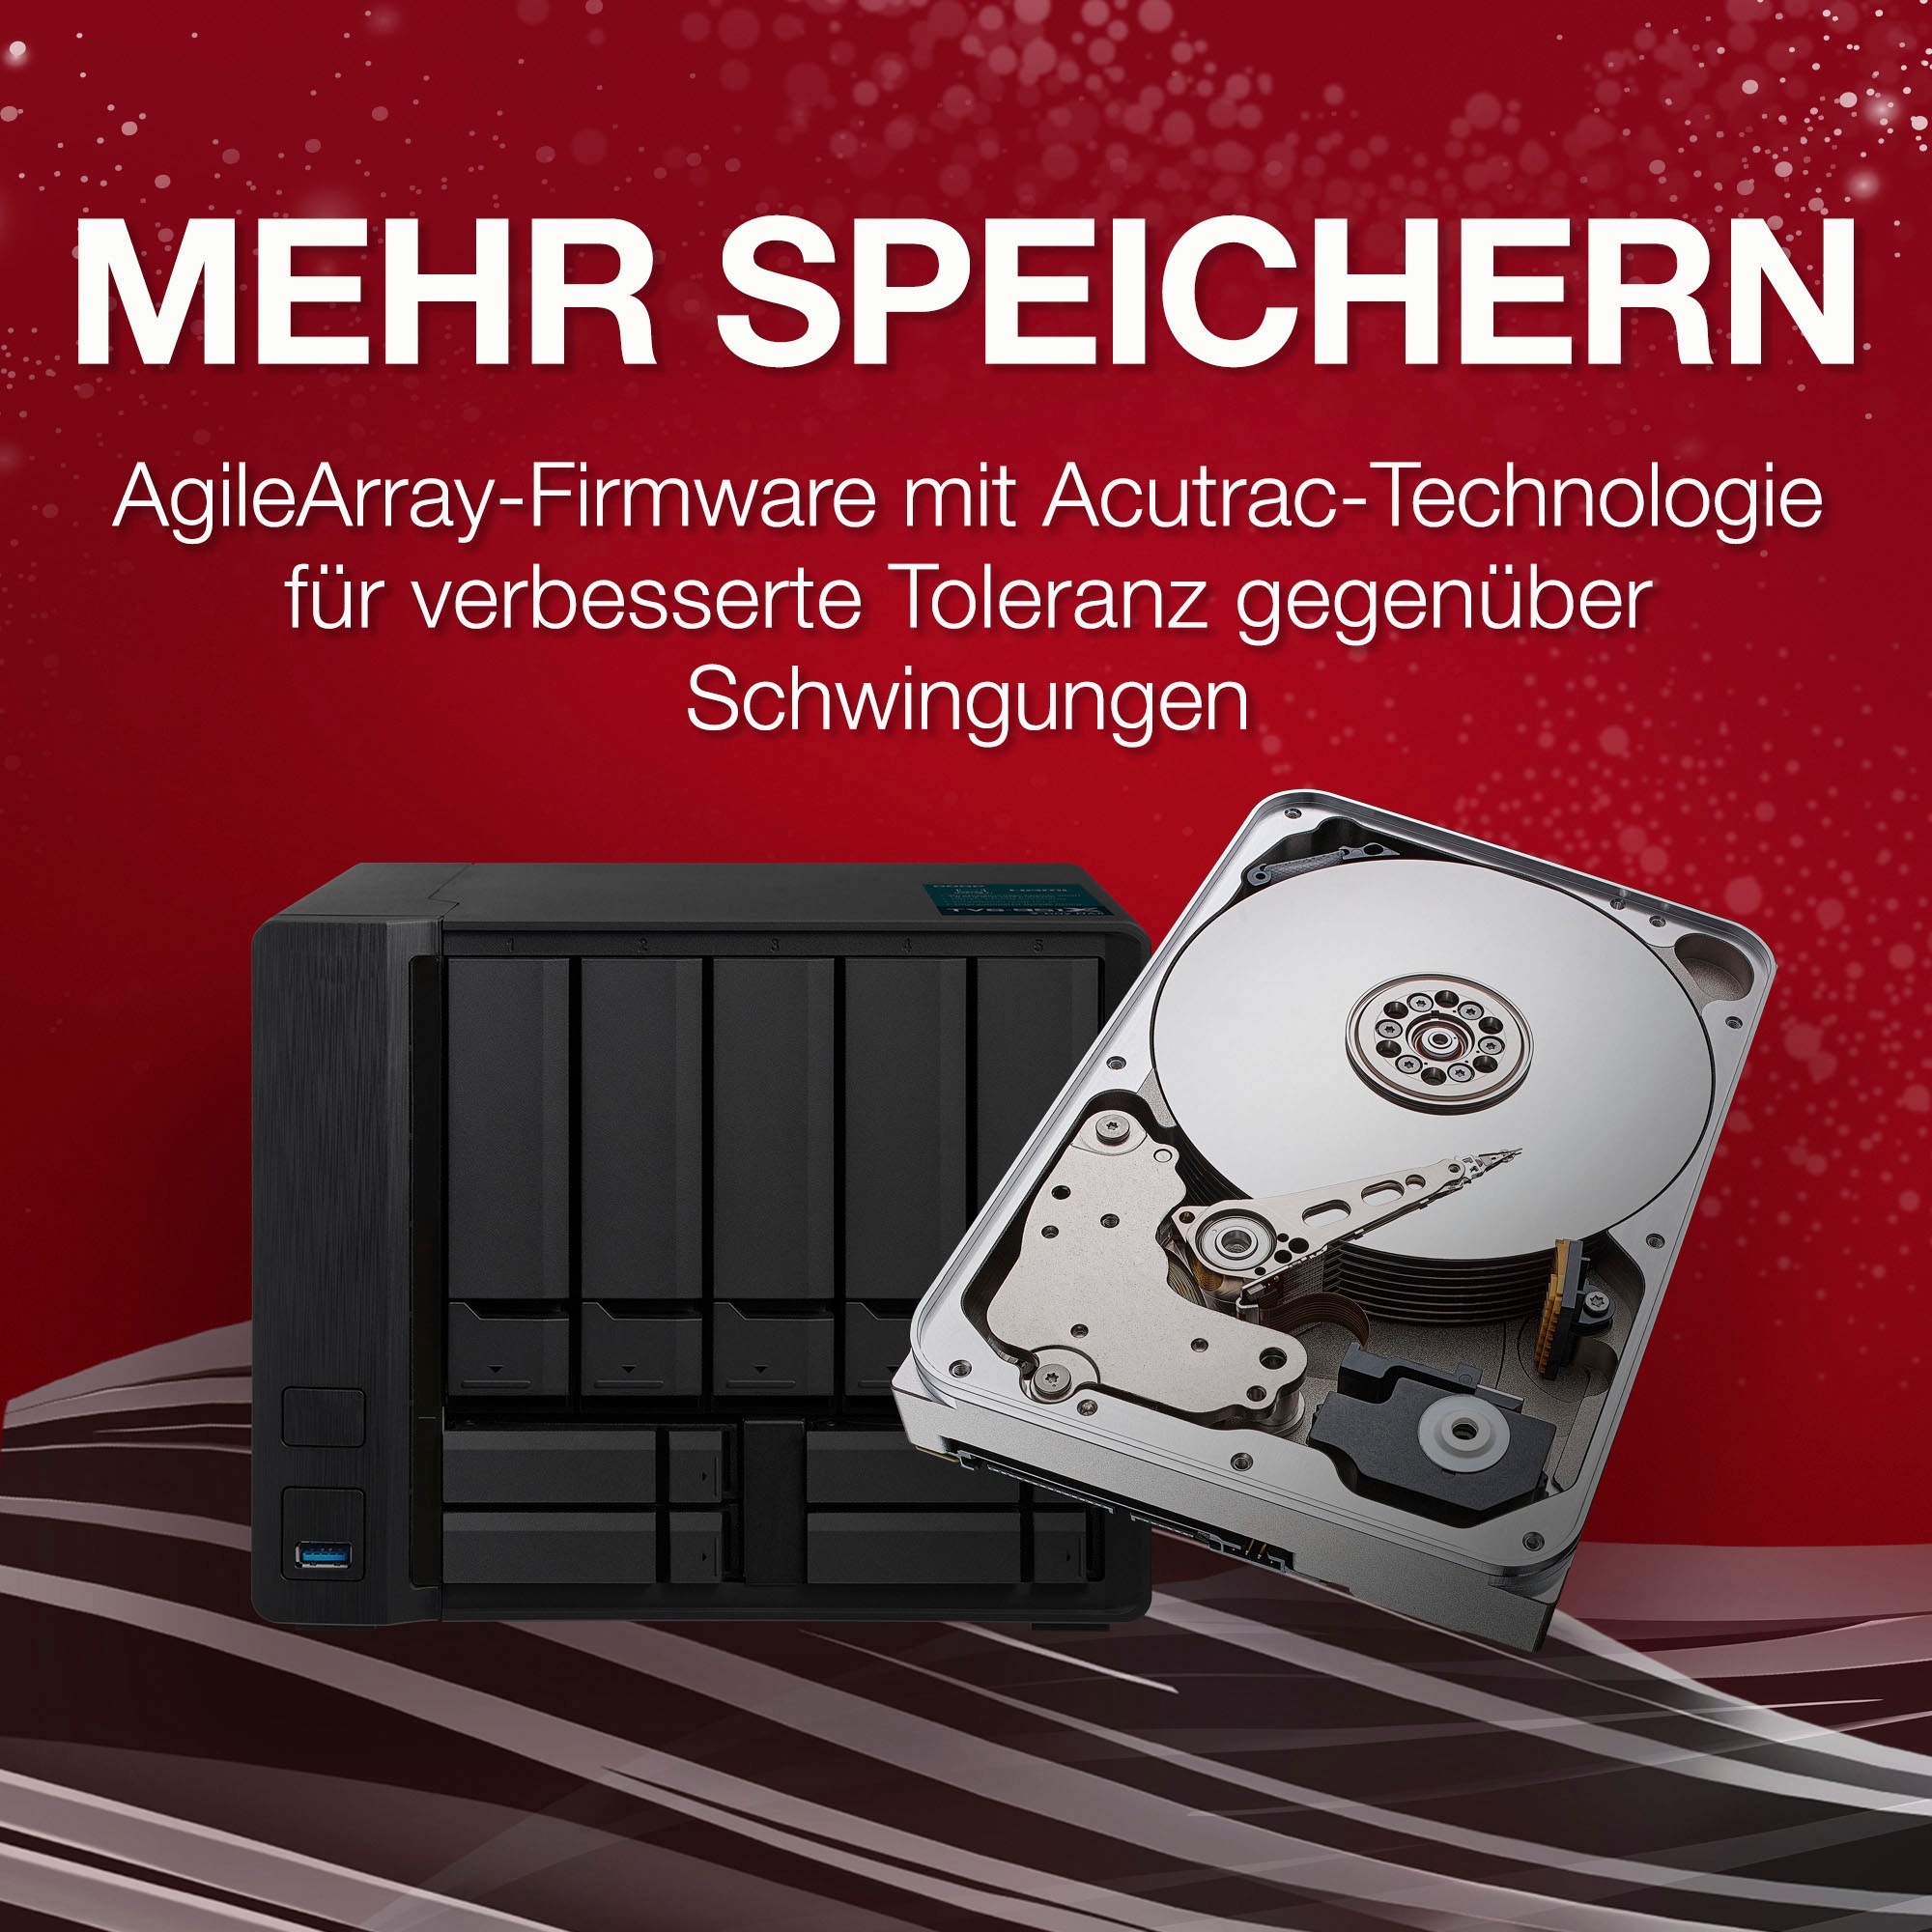 Seagate HDD-NAS-Festplatte »IronWolf«, 3,5 Zoll, Anschluss SATA, Bulk, inkl. 3 Jahre Rescue Data Recovery Services